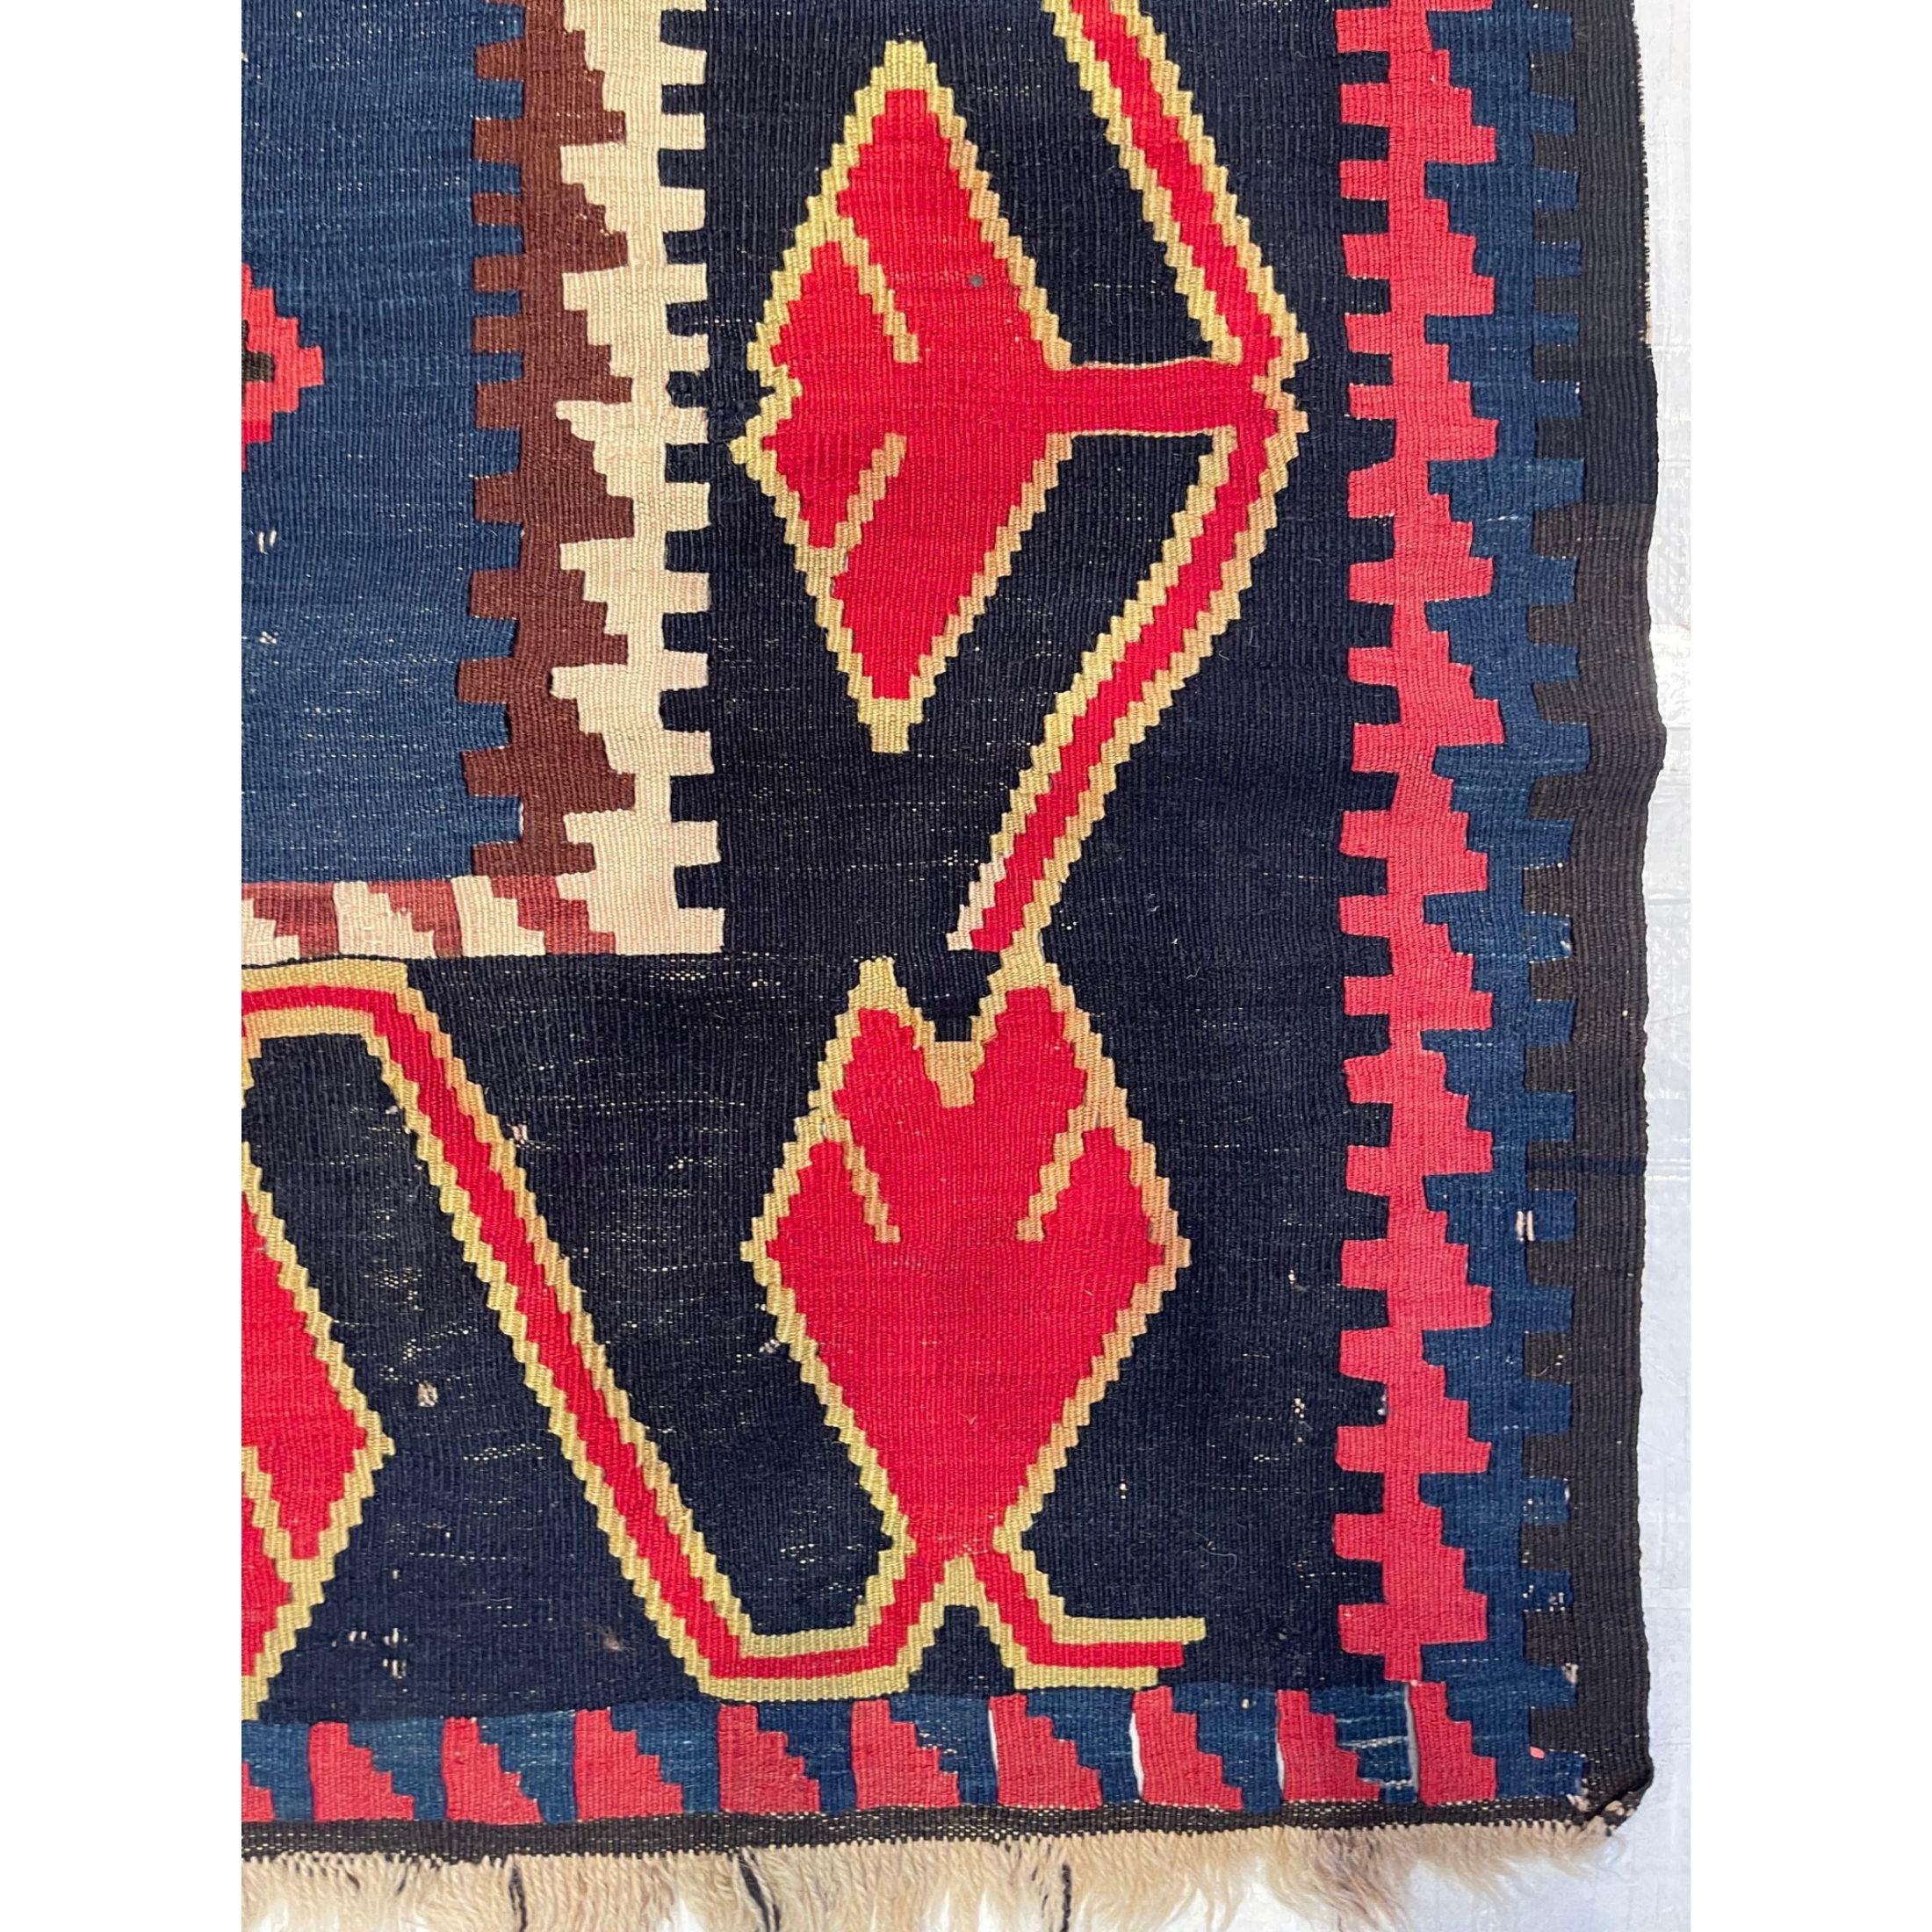 Other Antique Kilim Geometric Runner Rug 13'1'' X 5'11'' For Sale